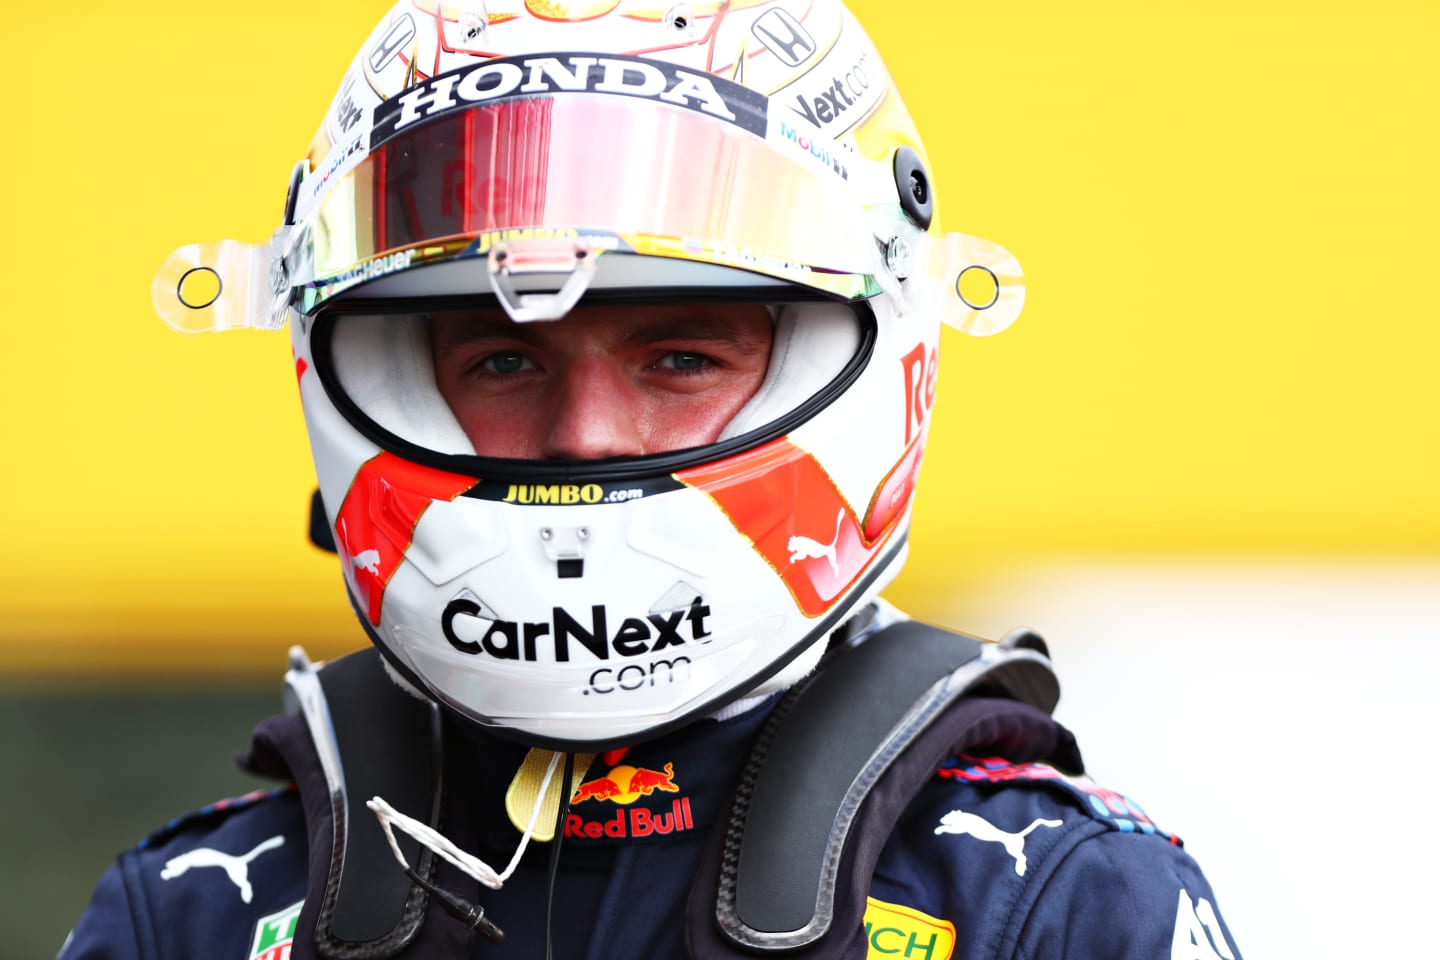 IMOLA, ITALY - APRIL 17: Third place qualifier Max Verstappen of Netherlands and Red Bull Racing looks on in parc ferme during qualifying ahead of the F1 Grand Prix of Emilia Romagna at Autodromo Enzo e Dino Ferrari on April 17, 2021 in Imola, Italy. (Photo by Dan Istitene - Formula 1/Formula 1 via Getty Images)